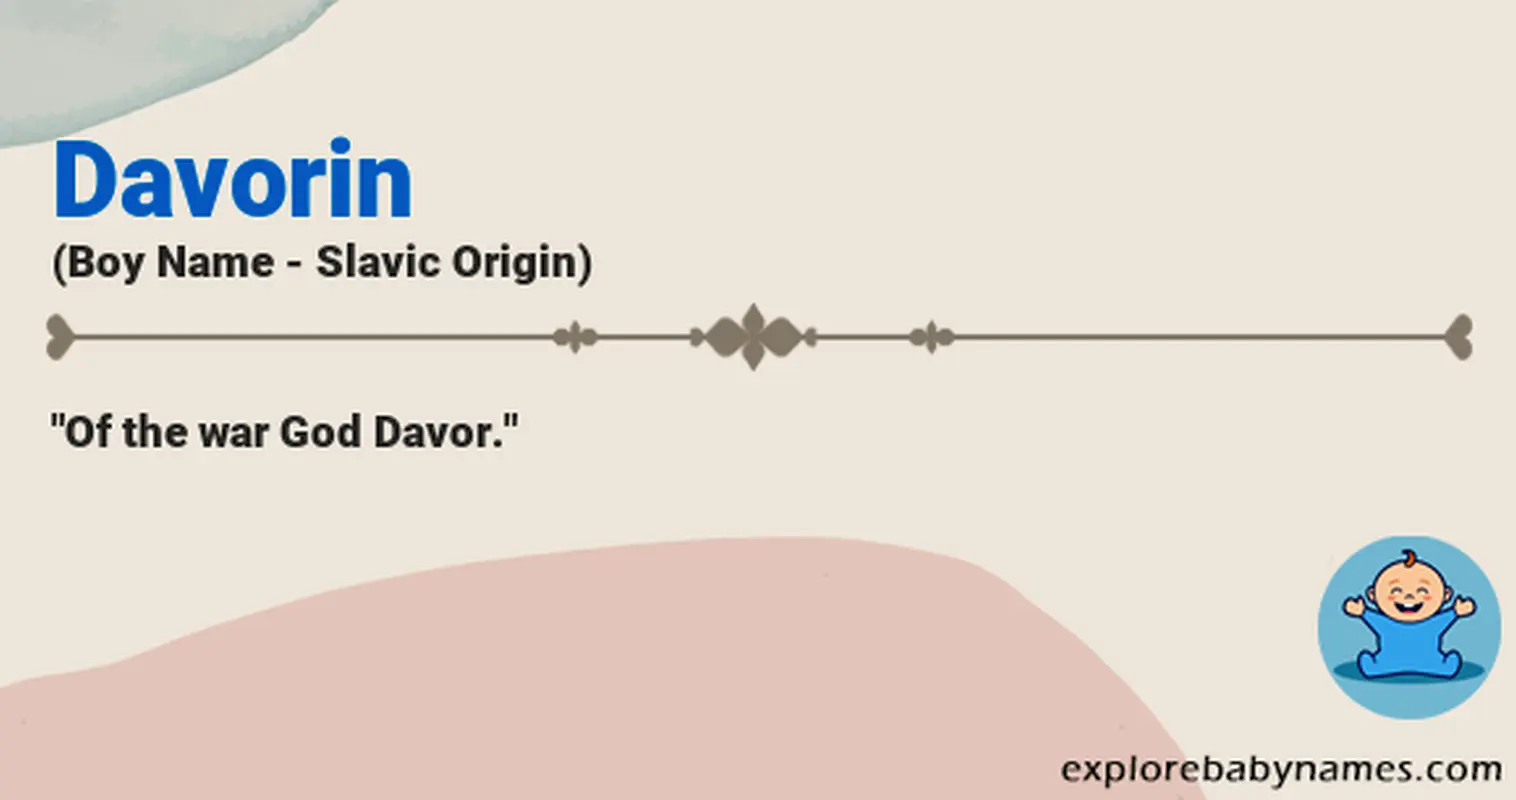 Meaning of Davorin